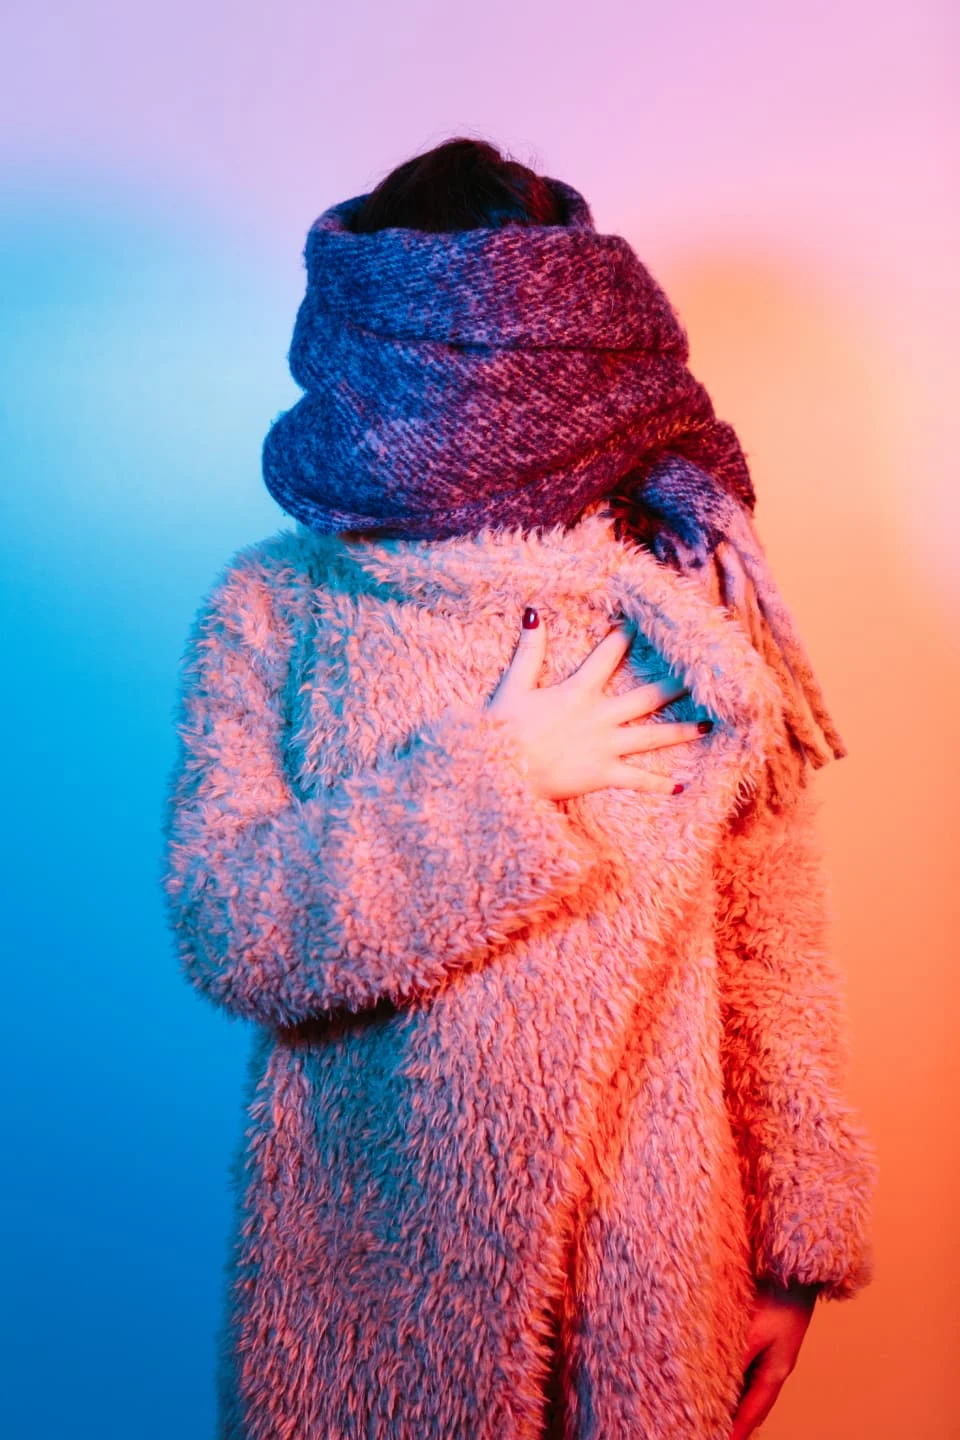 Lady covering her face with a scarf